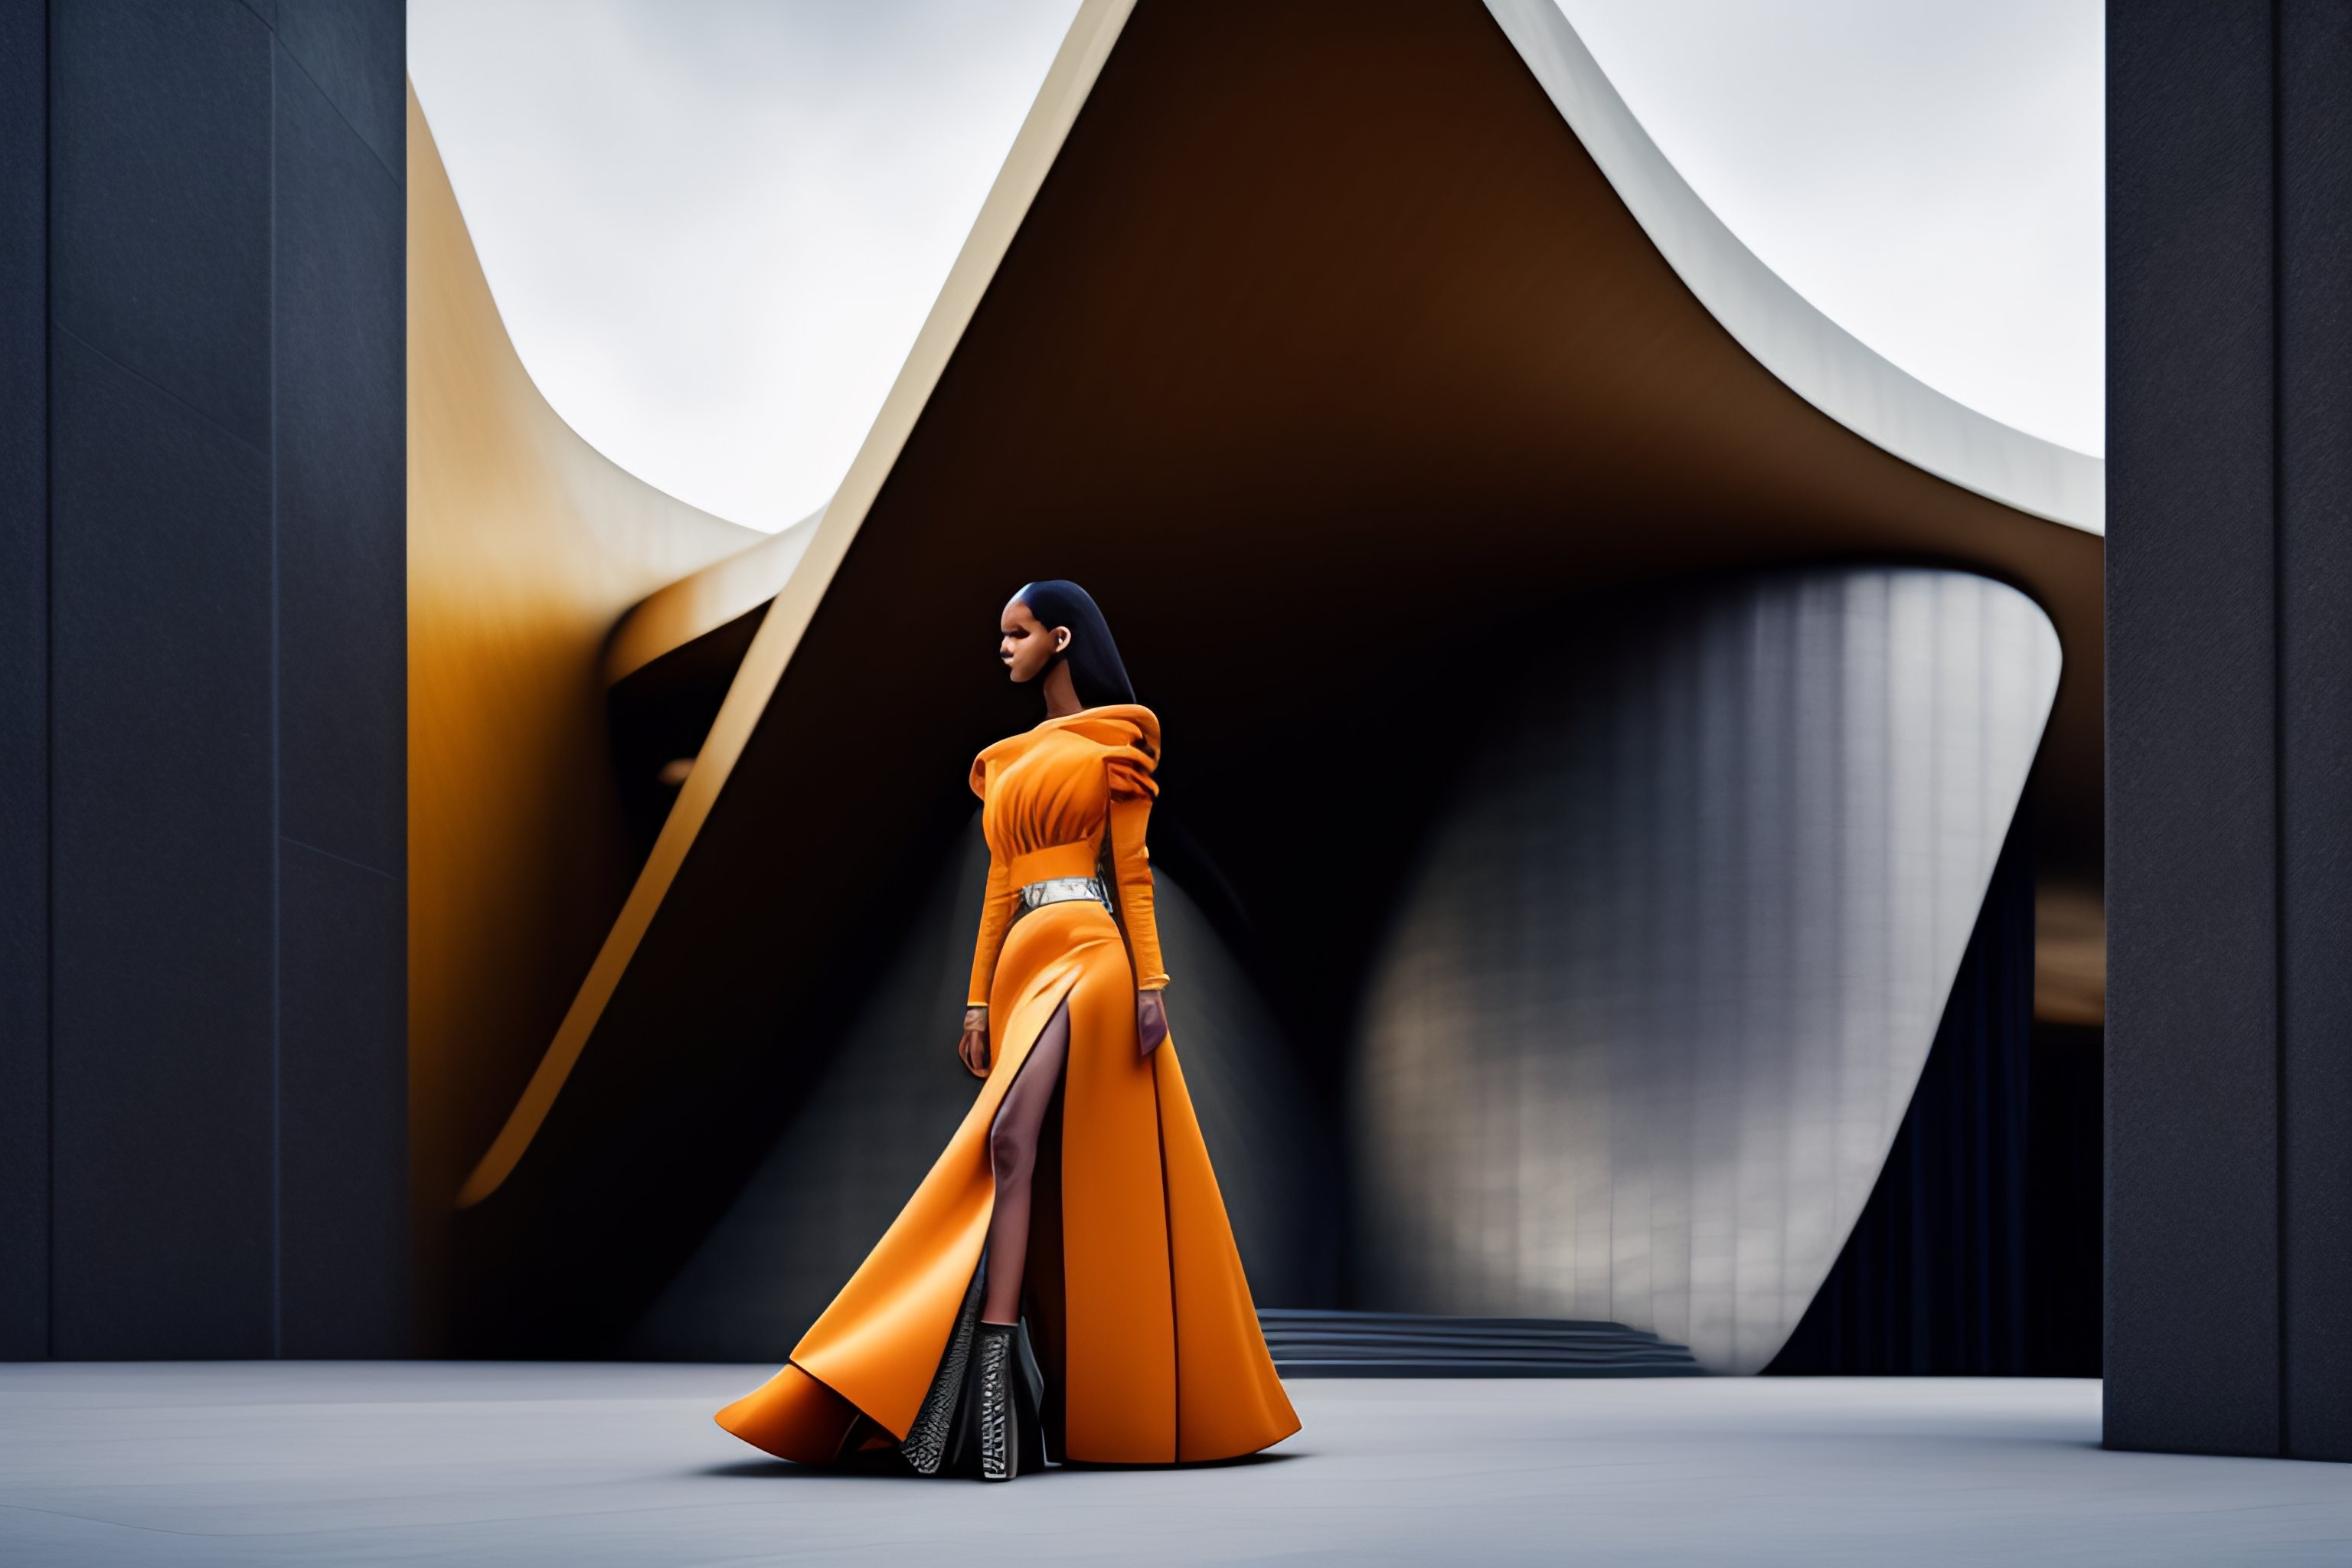 Lexica - Hyperrealistic Haute Couture Fashion Model wearing outfit by  balenciaga Photoshoot in the style of vogue Magazine in front of brutalist  para